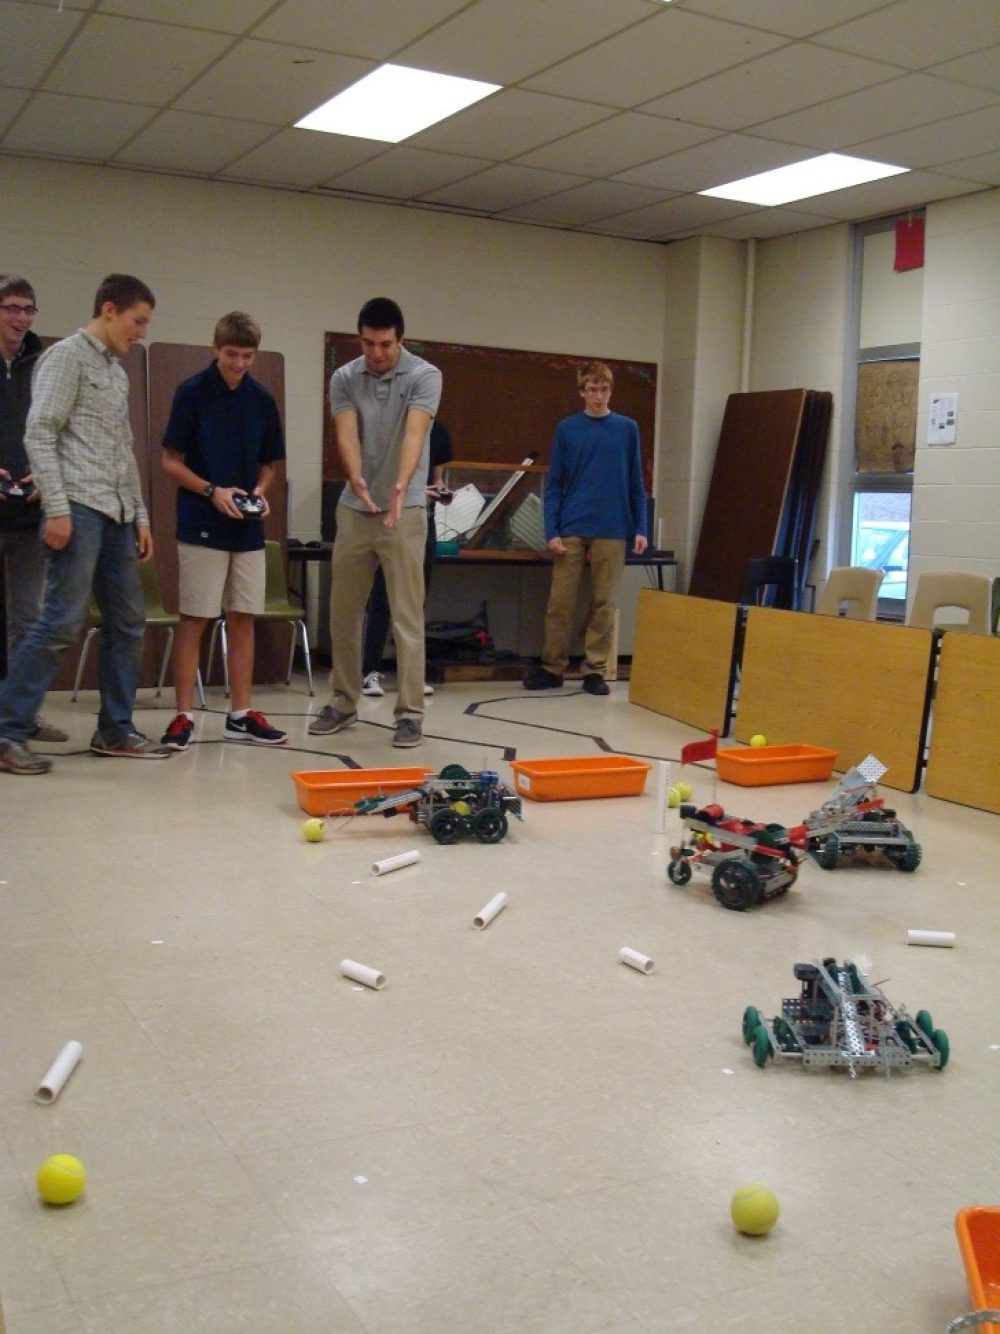 Several students controlling small robots